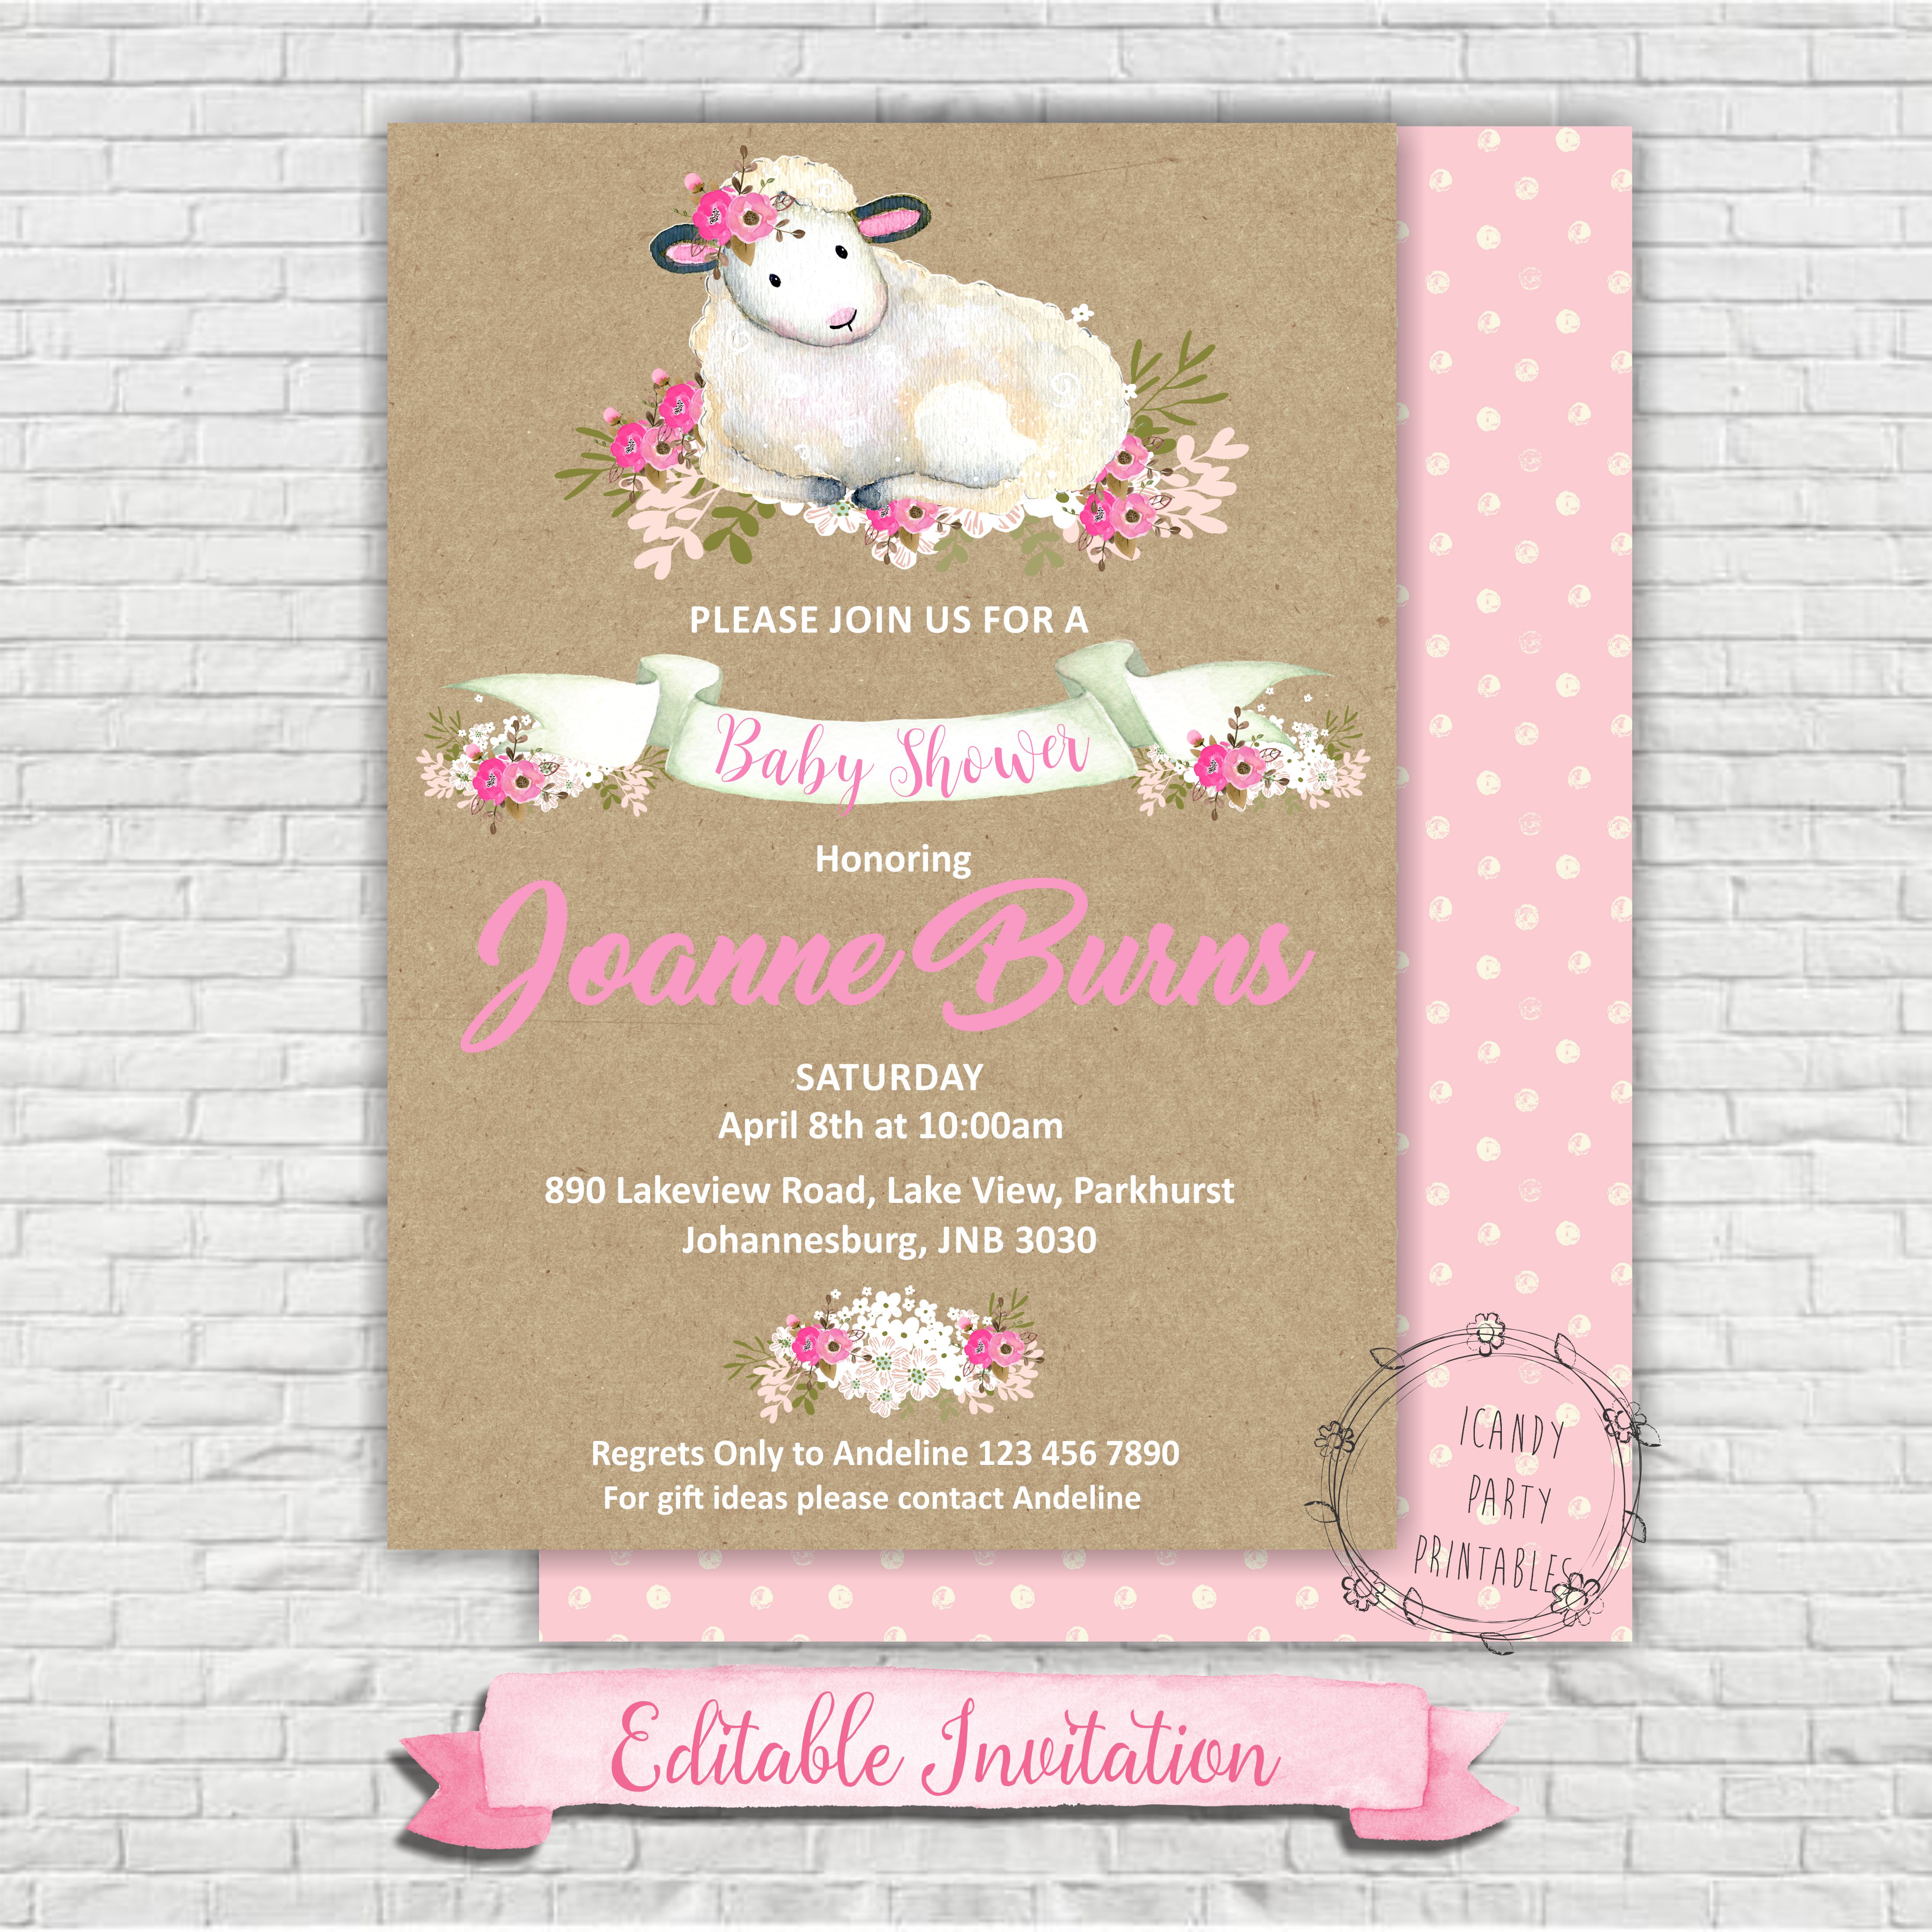 Full Size of Baby Shower:baby Shower Invitations Baby Shower Card Message Ideas Baby Girl Party Plates Baby Shower Invitations Baby Shower Favors